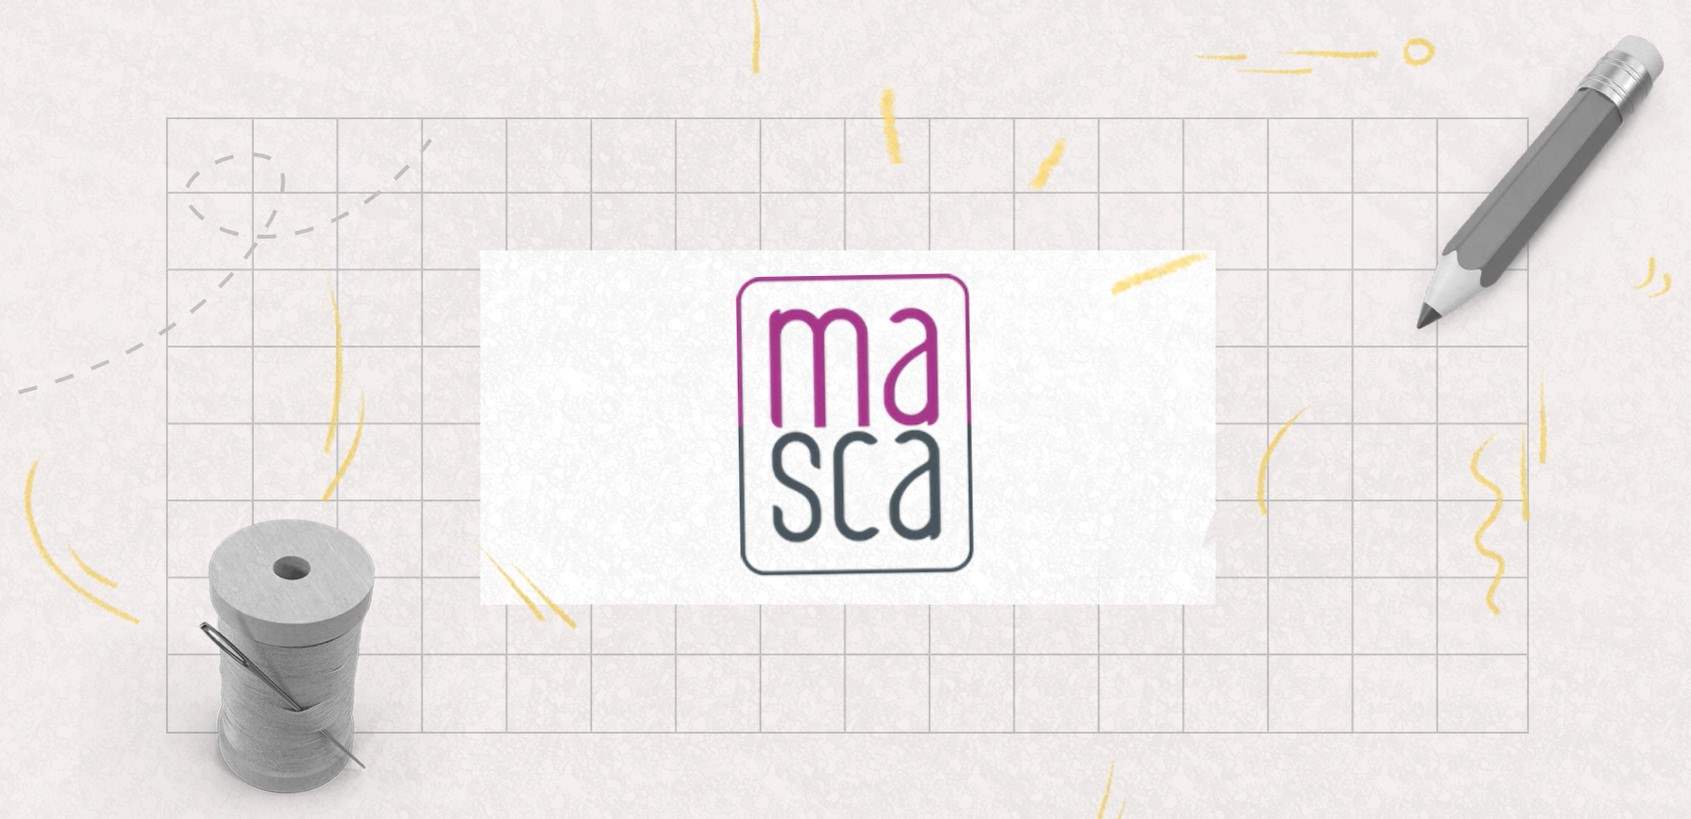 If a brilliant idea appeals to you, the Masca team will help you shape it